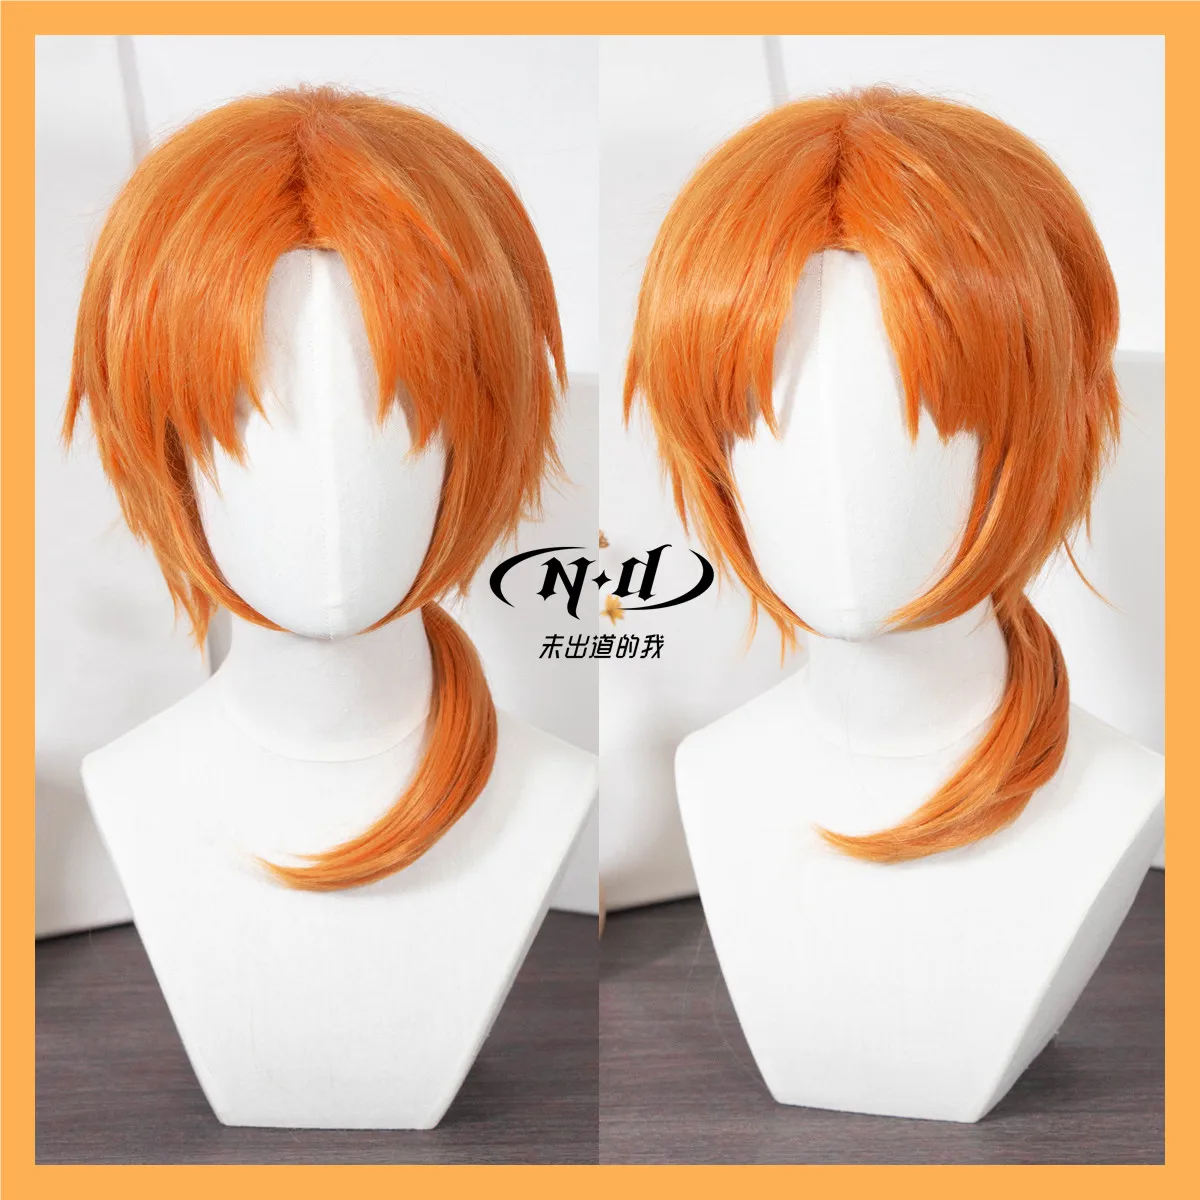 

Pre-Trimmed Wig! [ND Brand] Tsukinaga Leo, Genshin Impact, Authentic Customized Cosplay Wig, Heat Resistant Hair Fiber